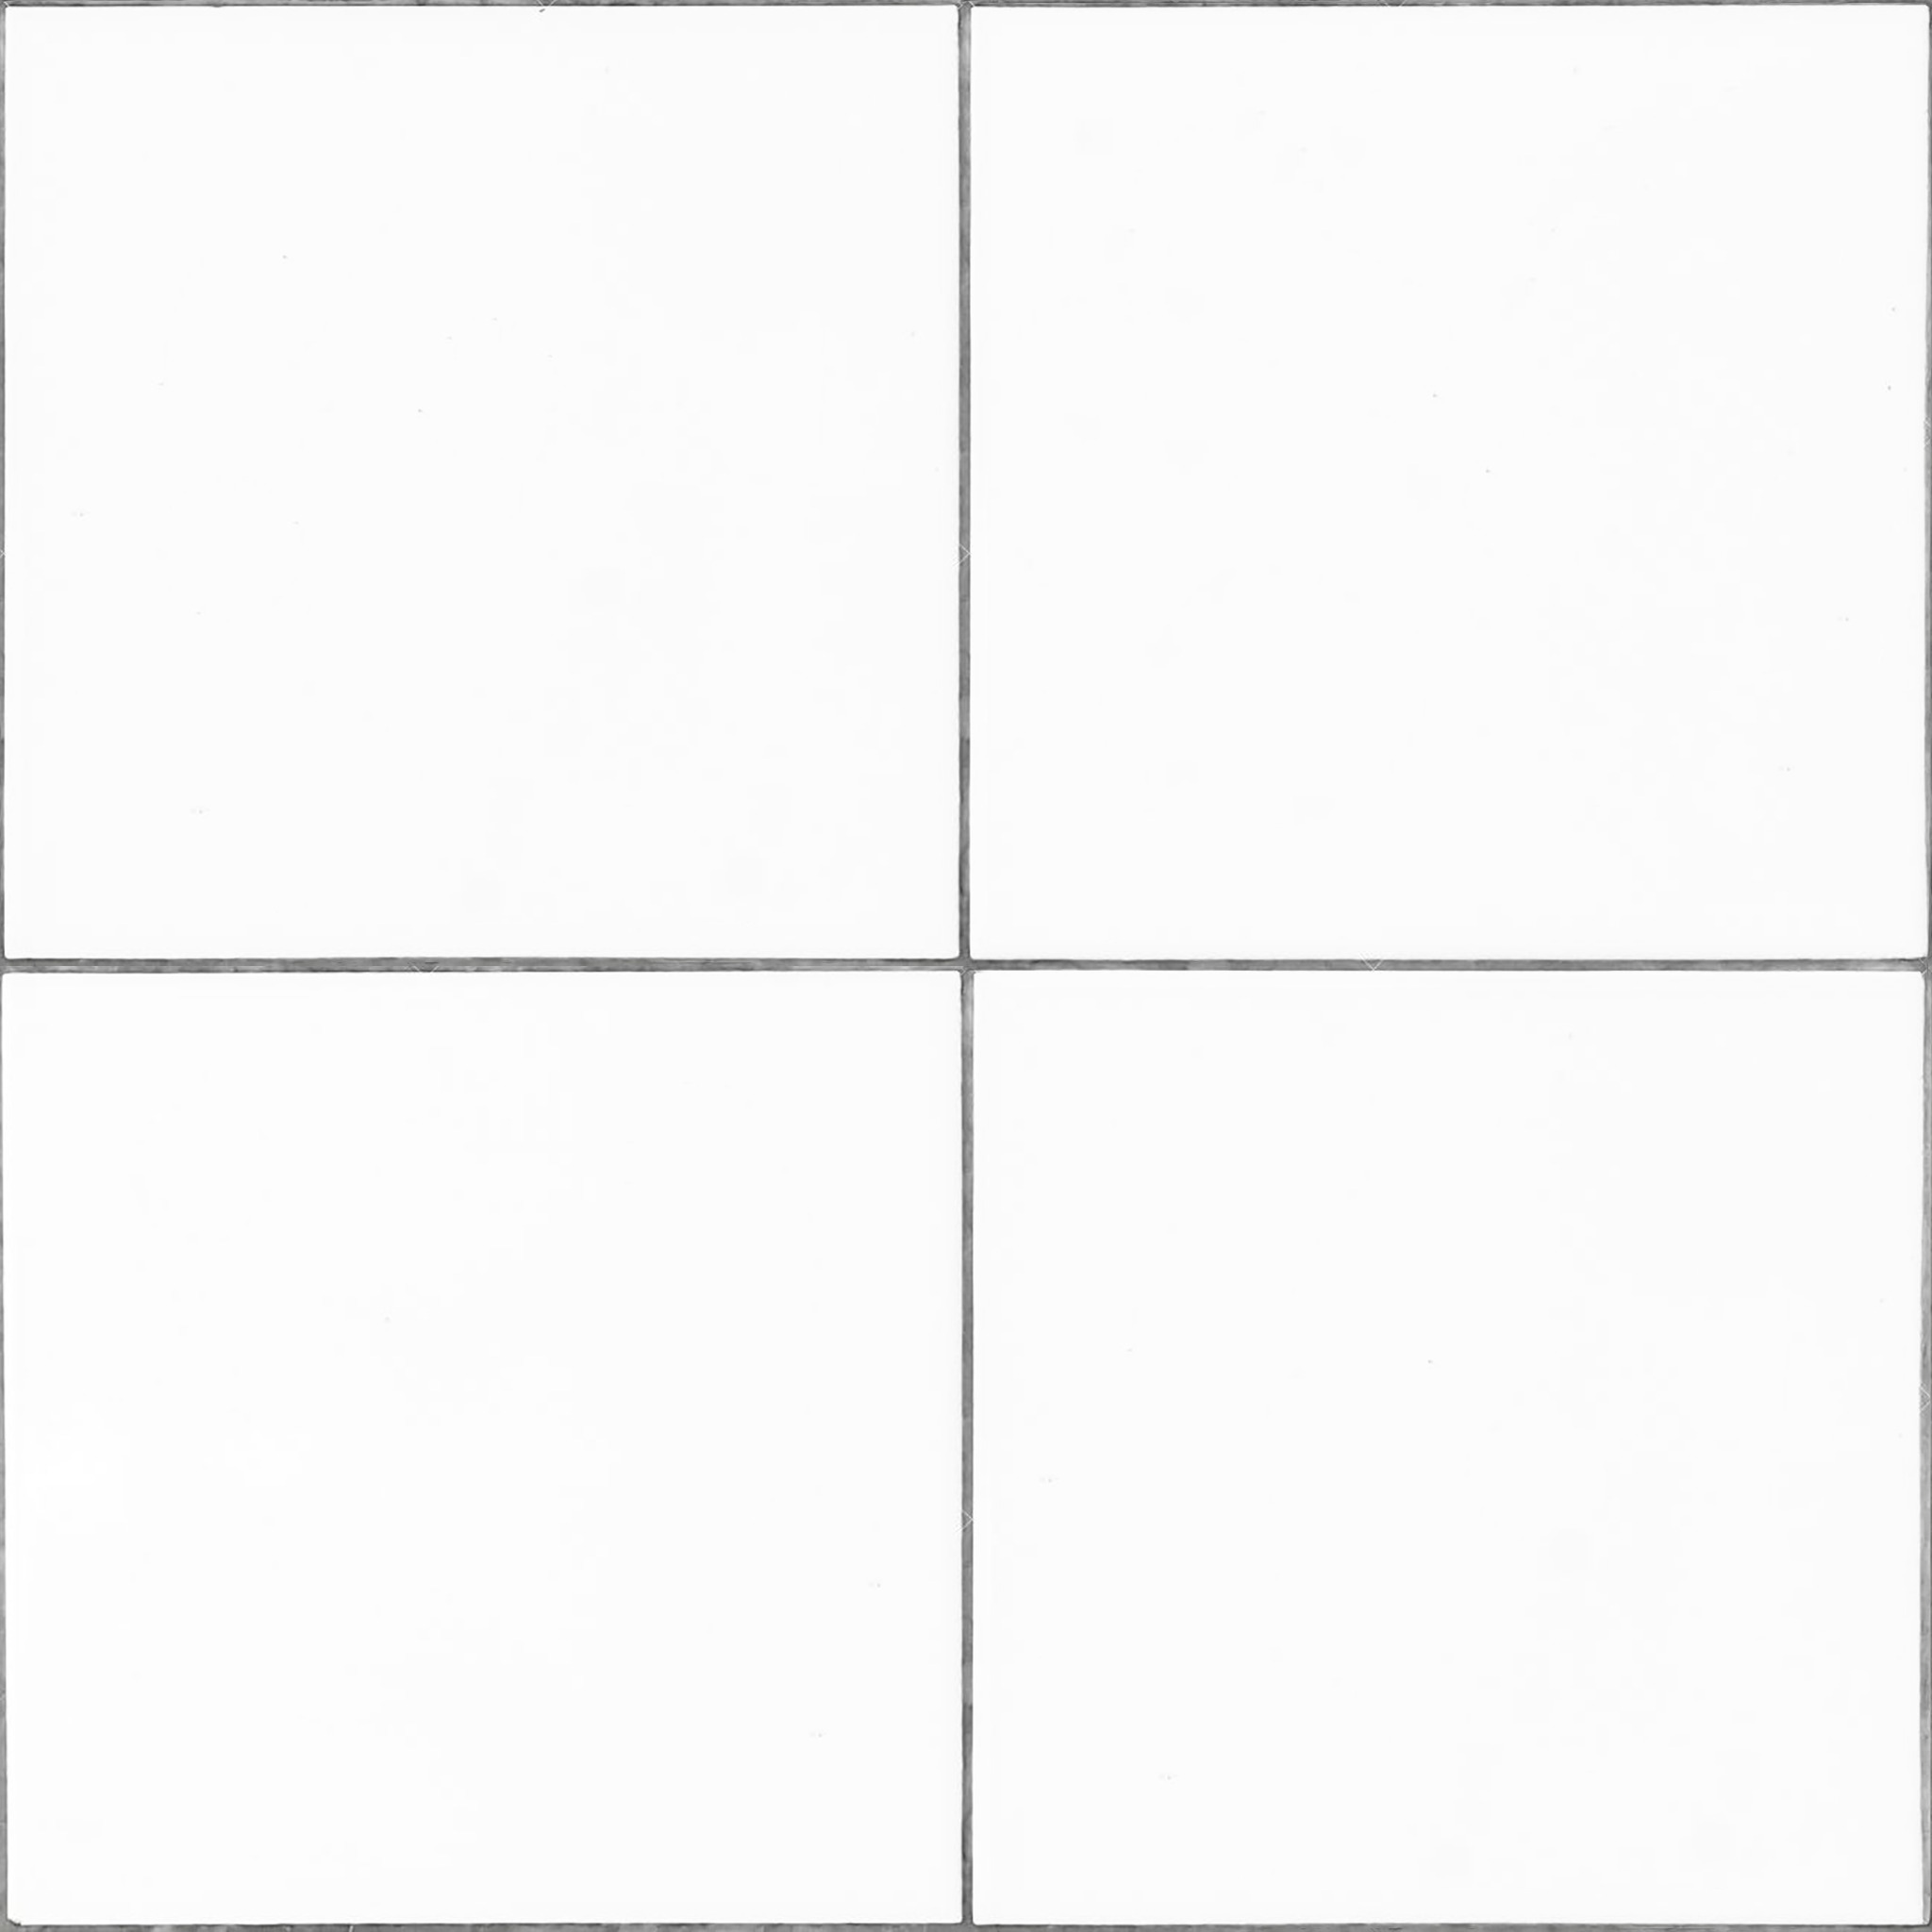 Smooth white tile texture to download - ManyTextures